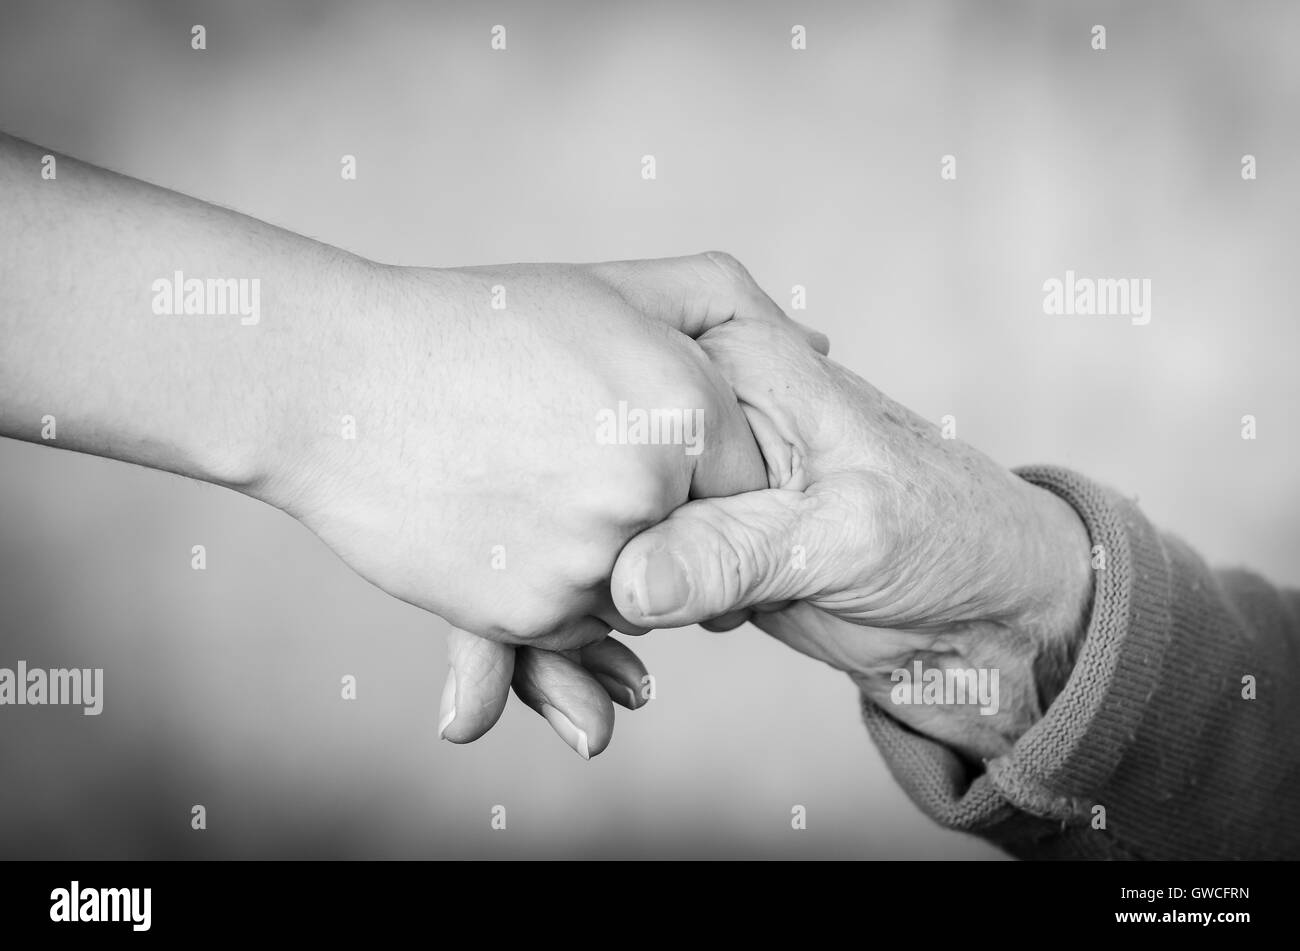 Closeup two hands holding each other appearing to be that of a young and one old person in black white edition. Stock Photo